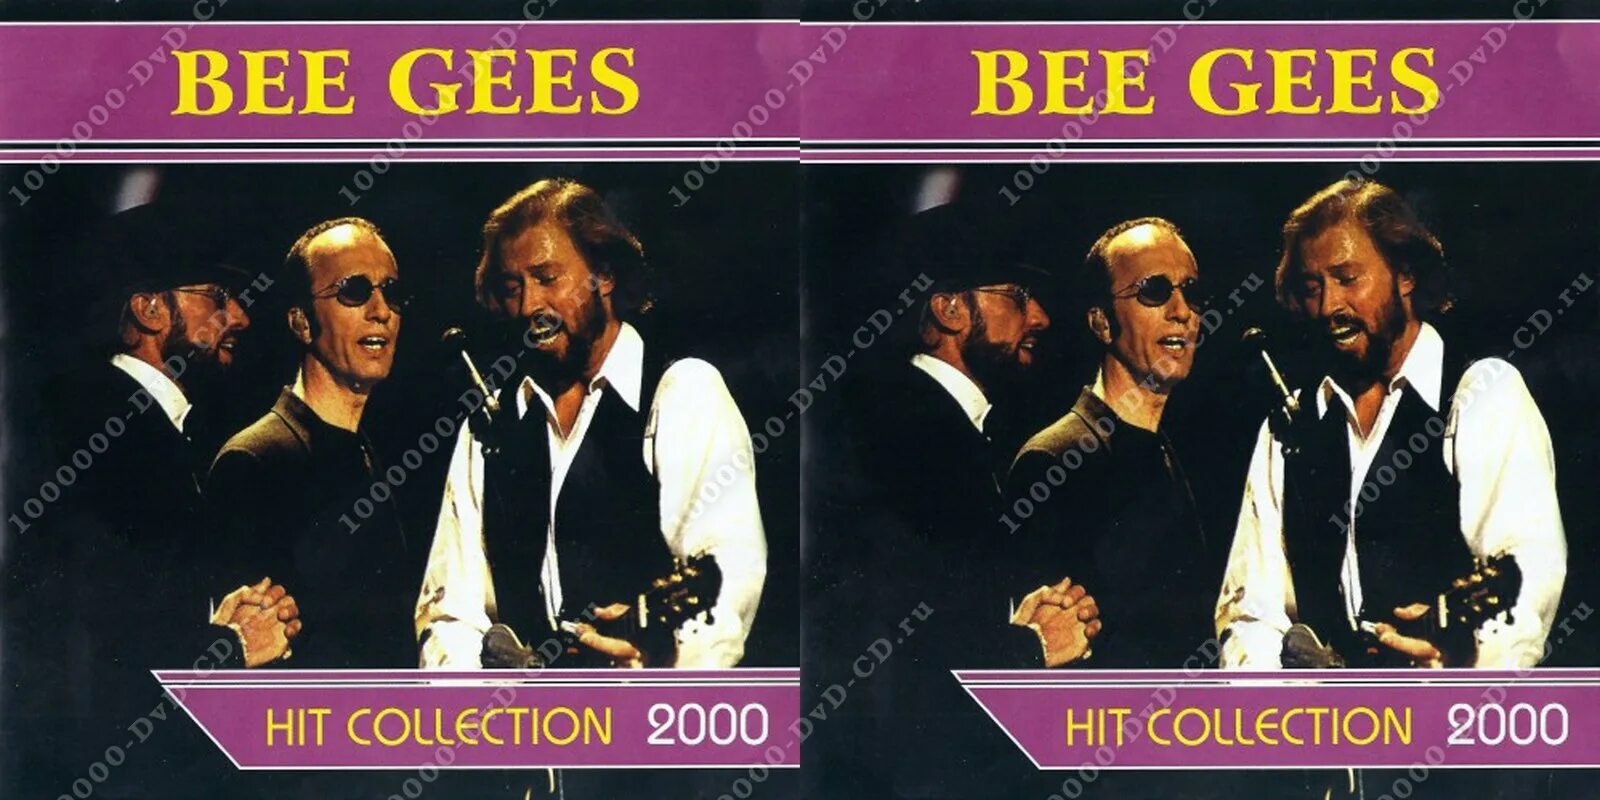 2000 collection. Обложка для mp3 Bee Gees. Bee Gees 2000. Fm 1996 Bee Gees. Bee Gees in 2000.